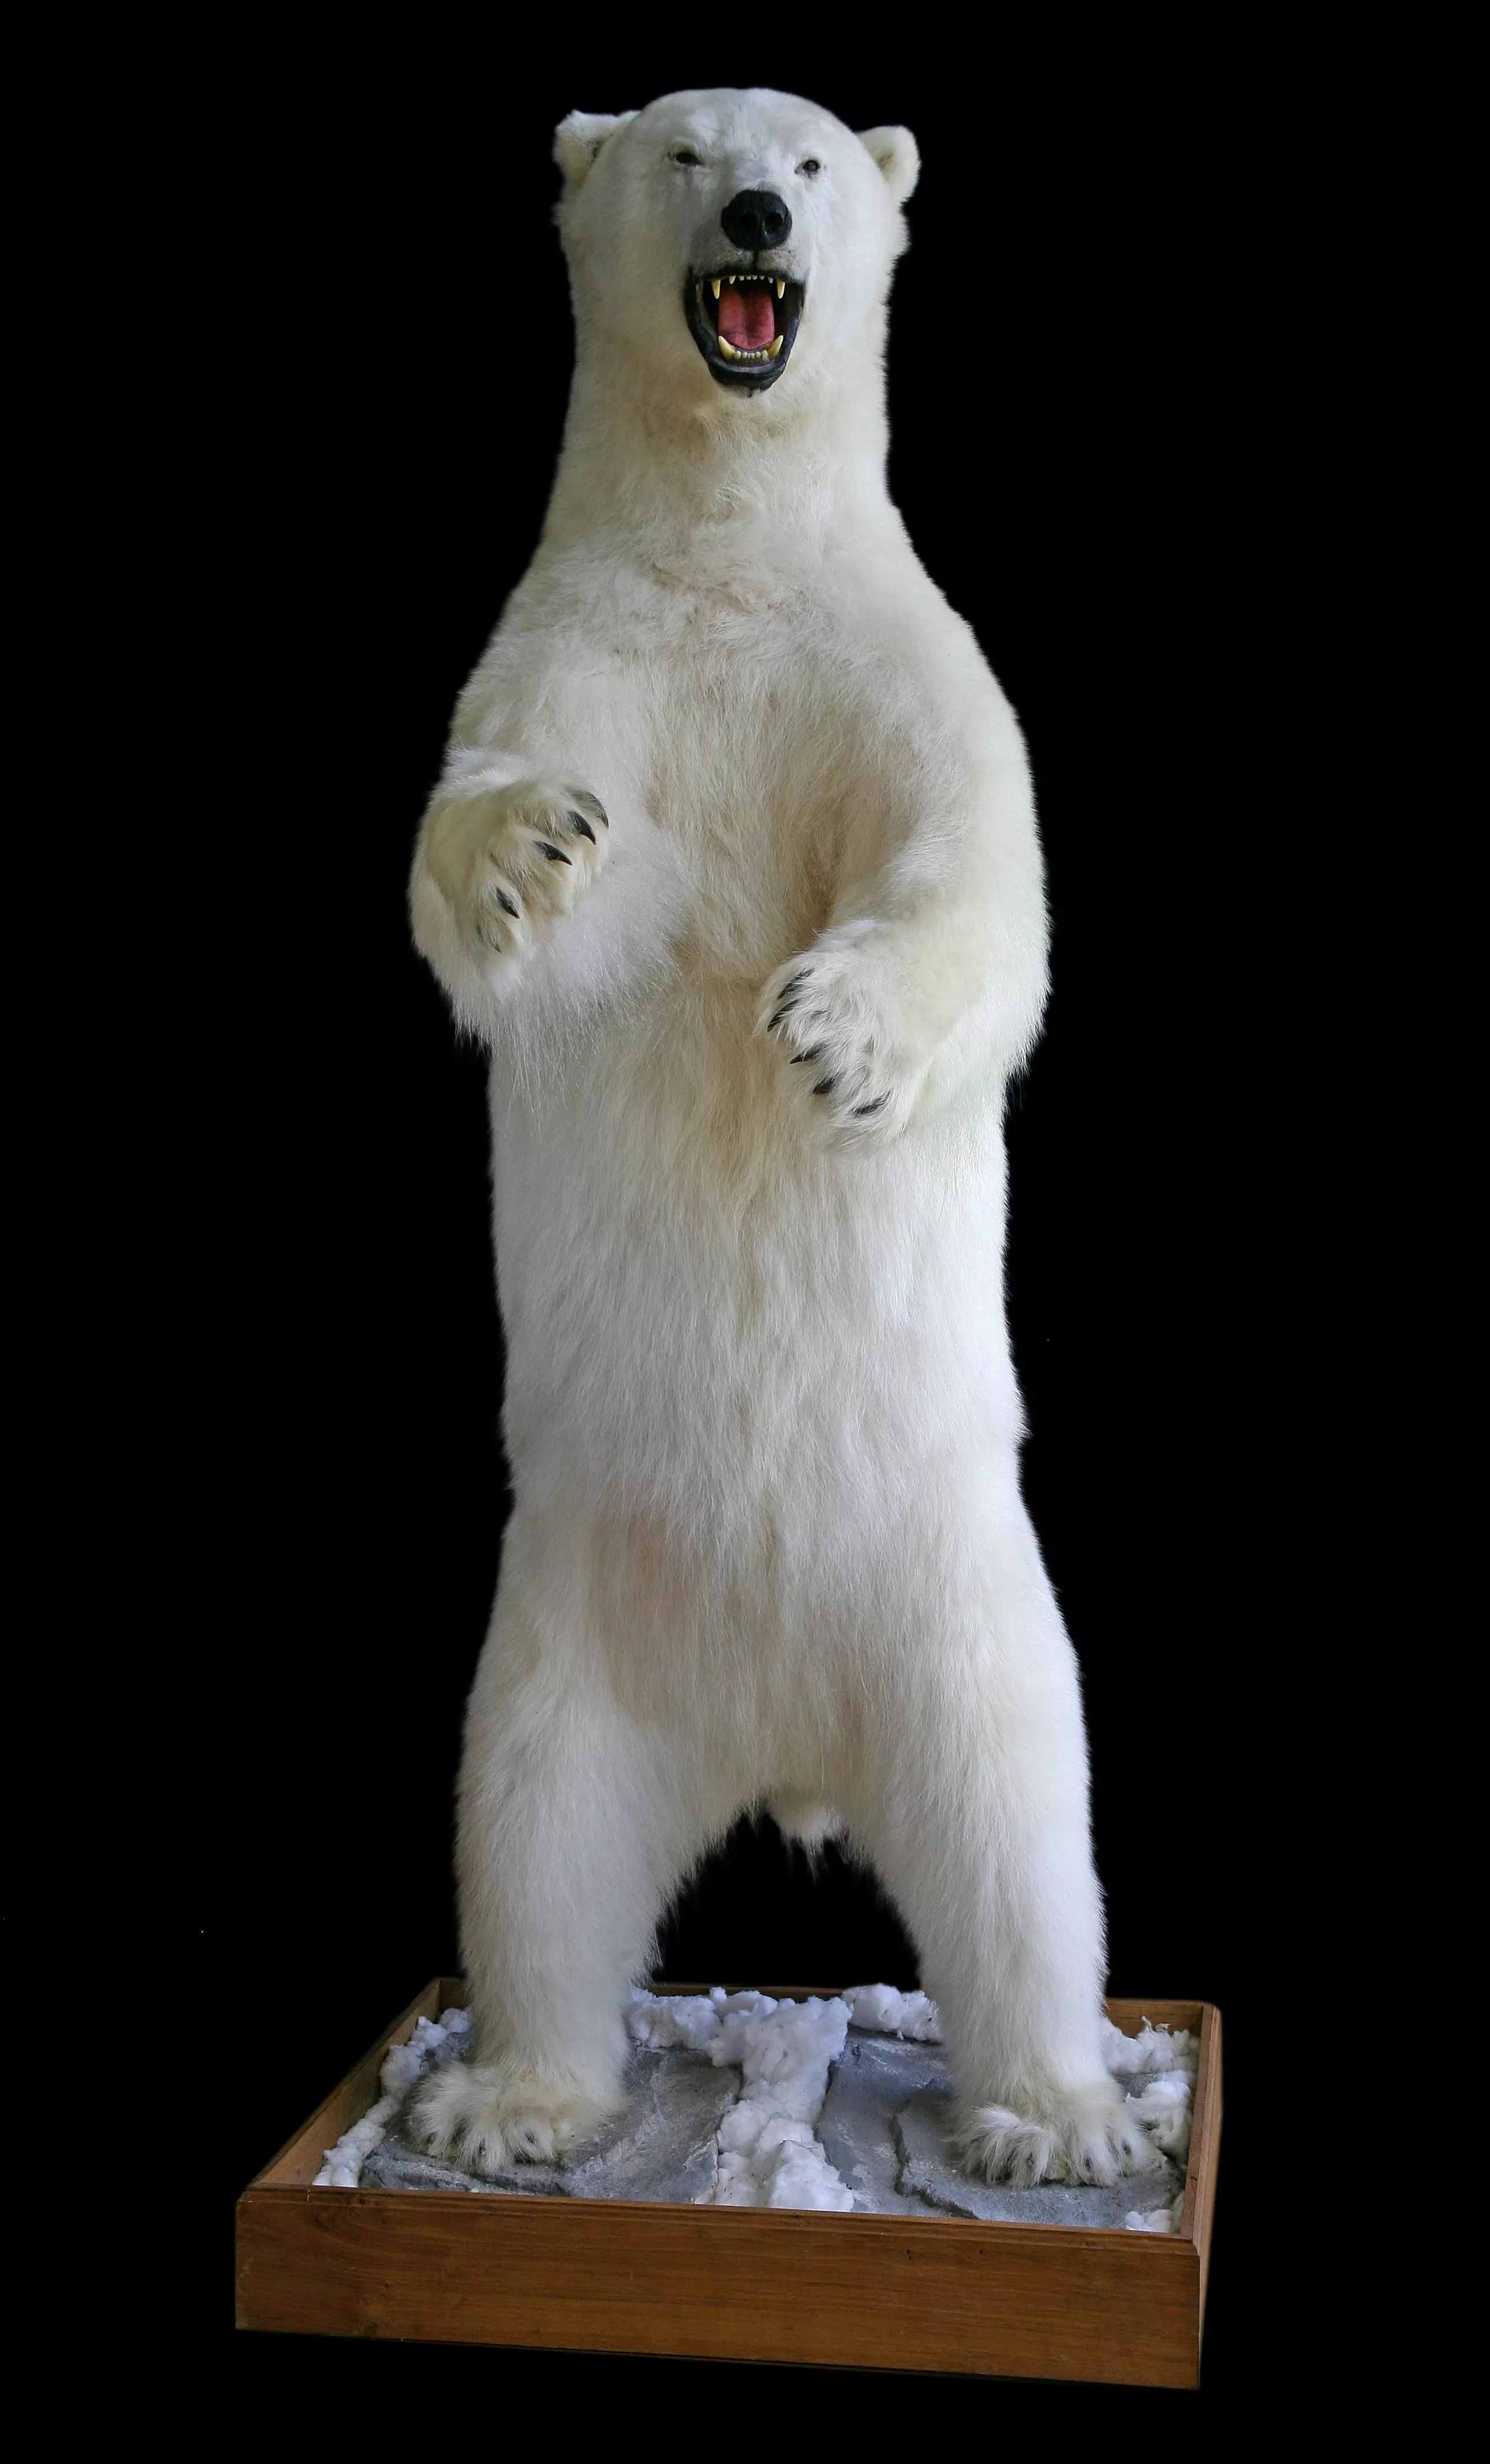 The stuffed polar bear was a number of strange animal pieces that were bought during the auction.